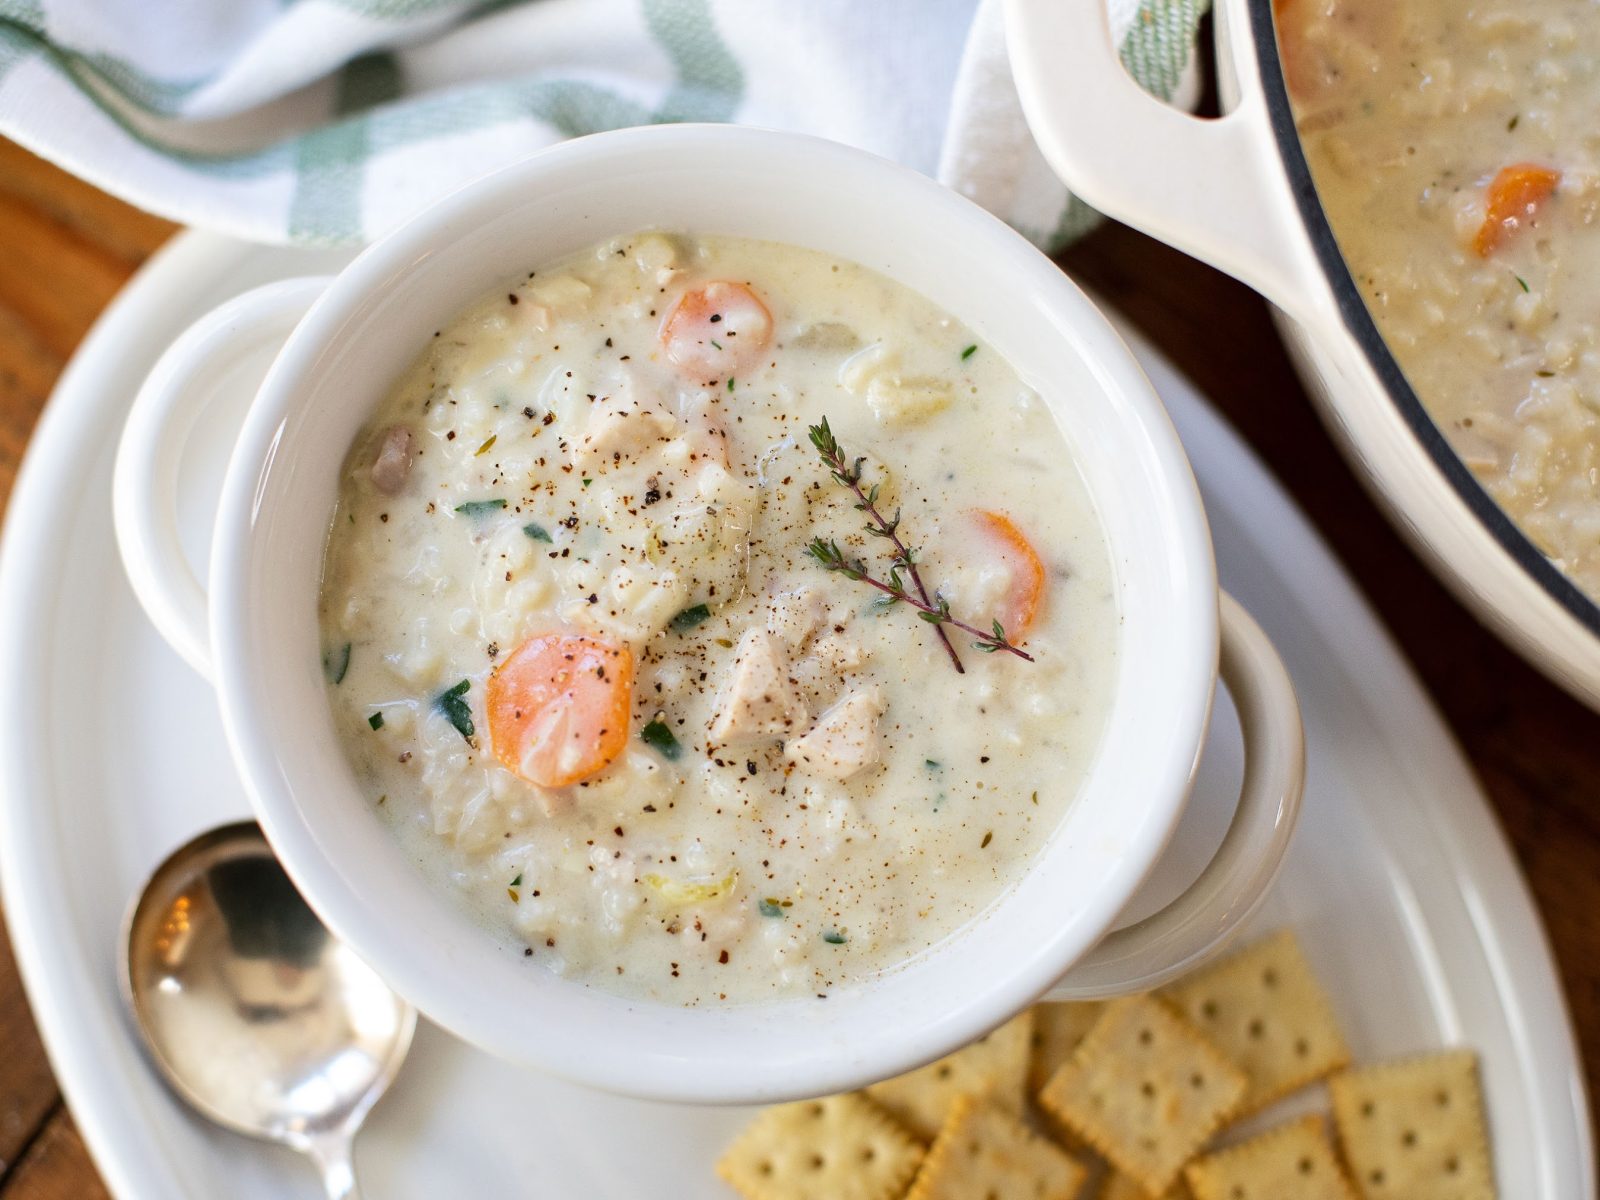 Pick Up A Super Discount On RiceSelect Product For All Your Favorite Holiday Meals - Try My Creamy Turkey & Rice Soup on I Heart Publix 2